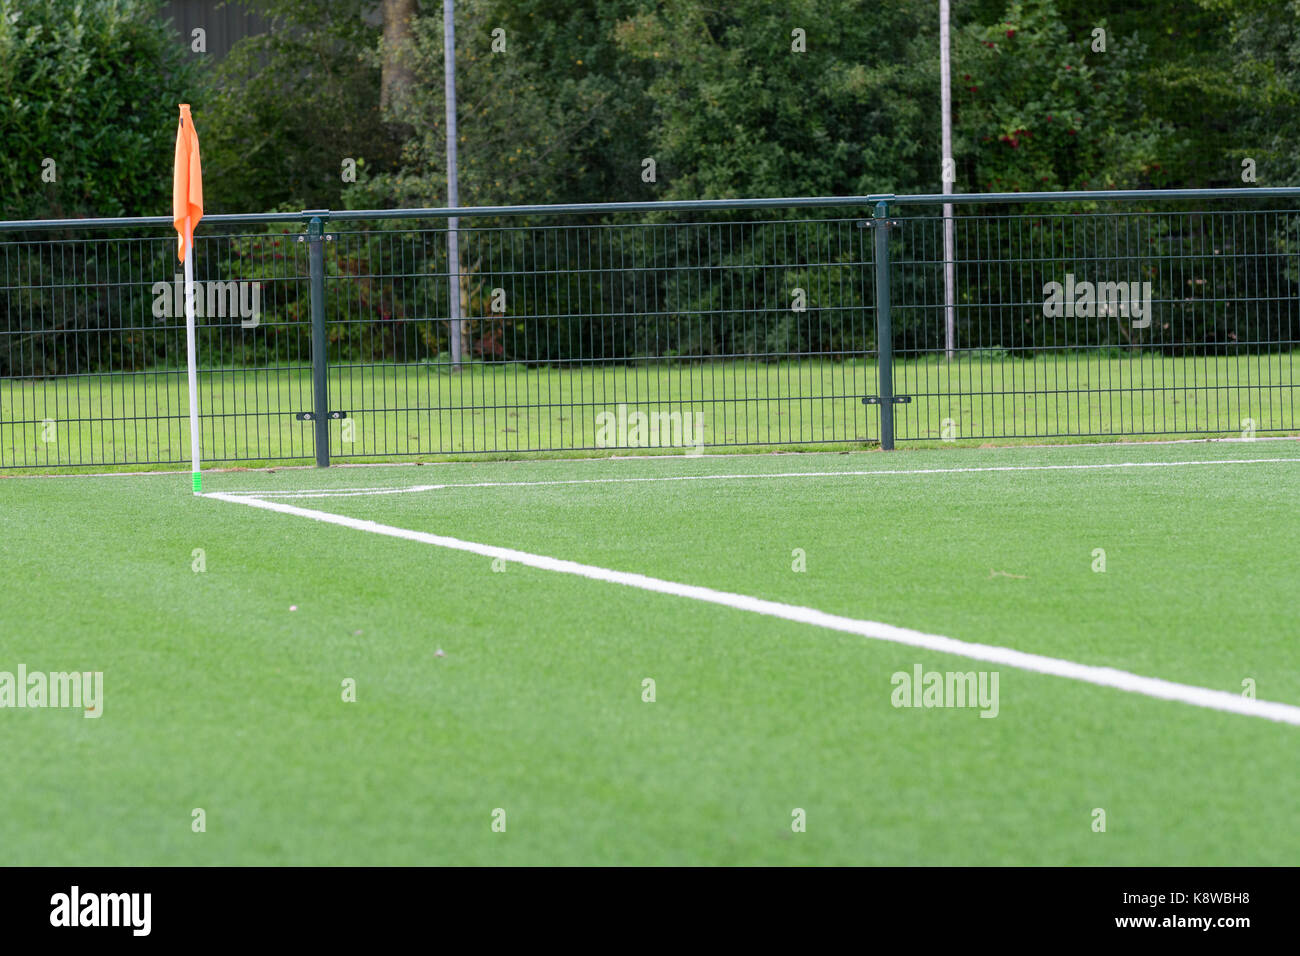 sideline and corner flag and baseline of an artificial grass soccer field Stock Photo